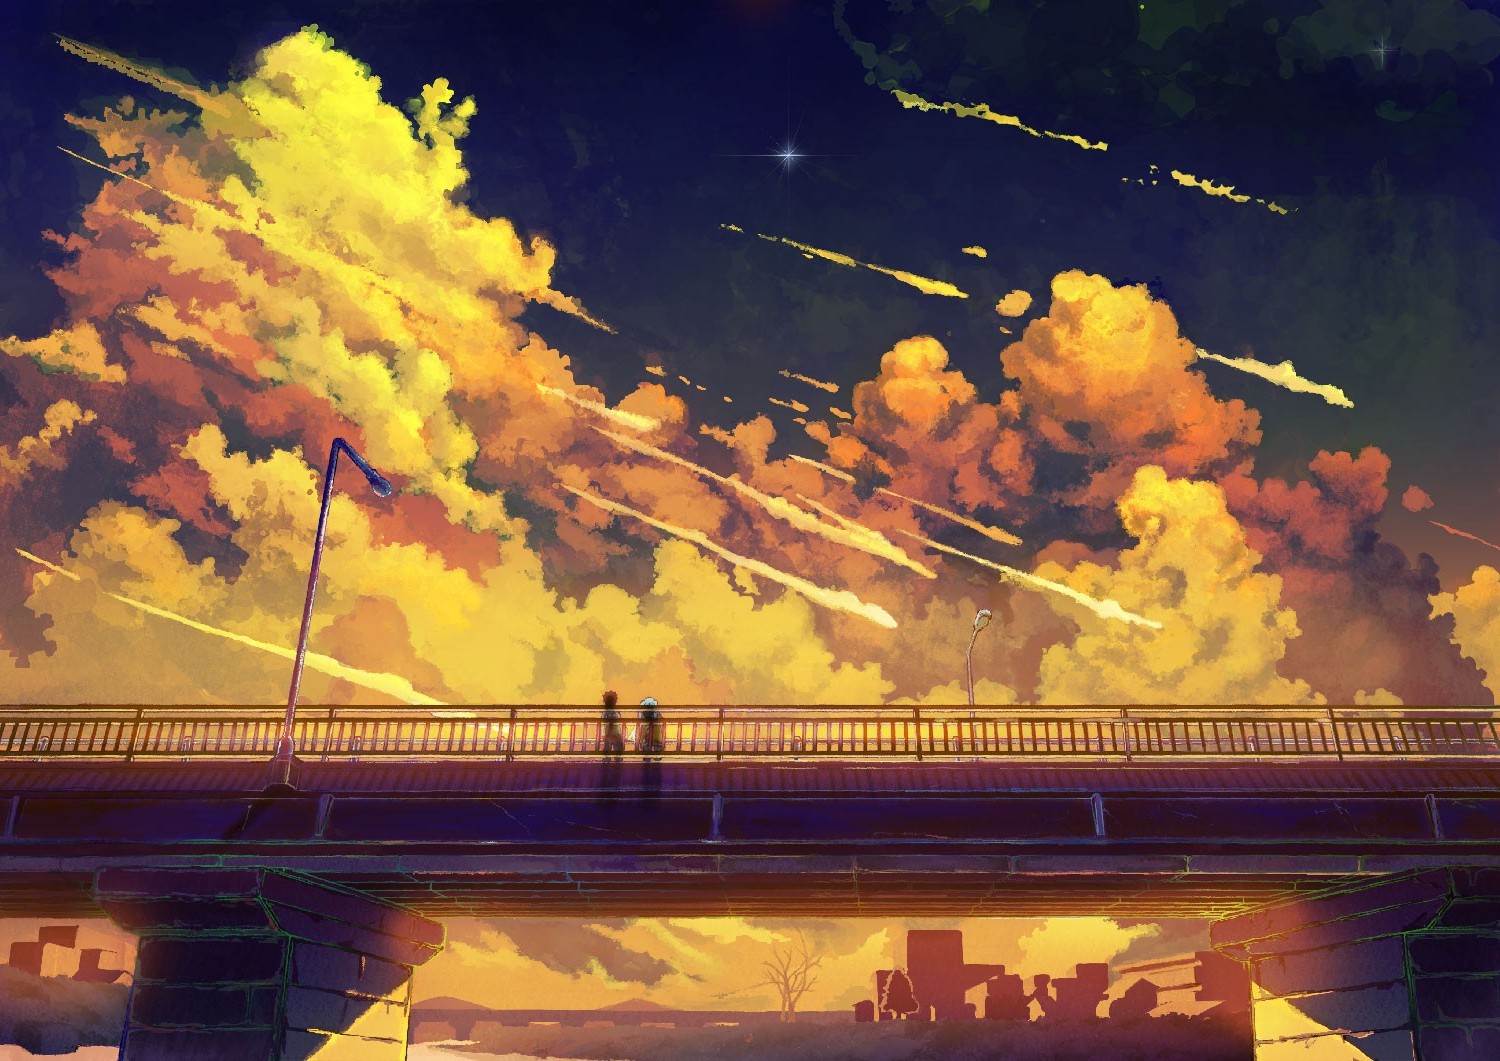 Wallpaper, sunlight, sunset, night, anime, reflection, sky, yellow, evening, morning, fire, Vocaloid, Hatsune Miku, dusk, color, dawn, atmosphere of earth, 1500x1061 px 1500x1061